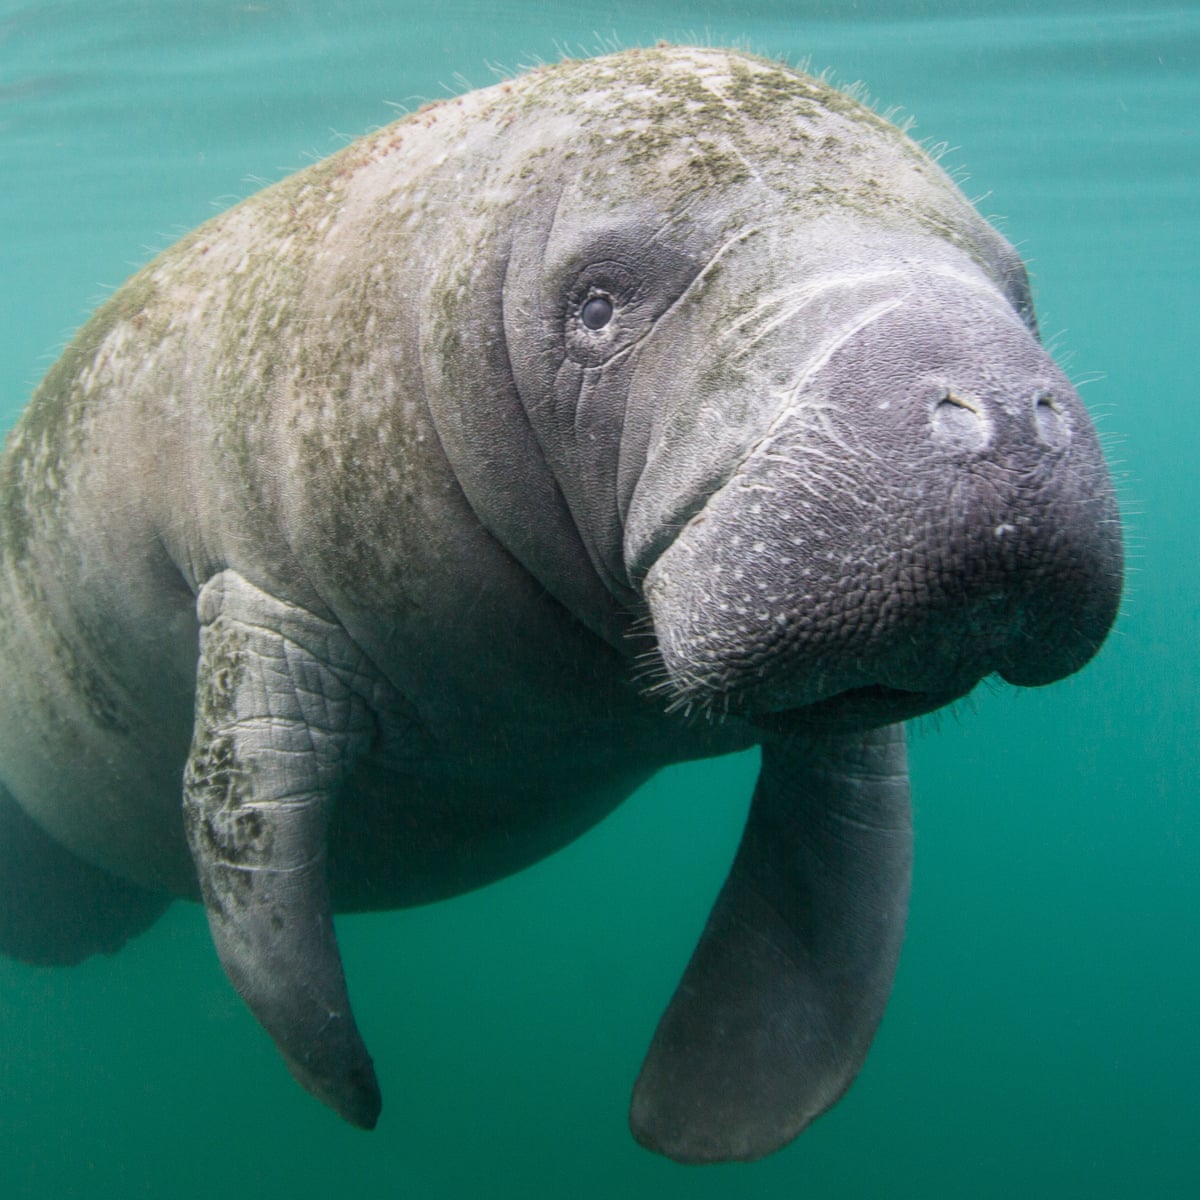 How do you tell the difference between manatees and dugongs?